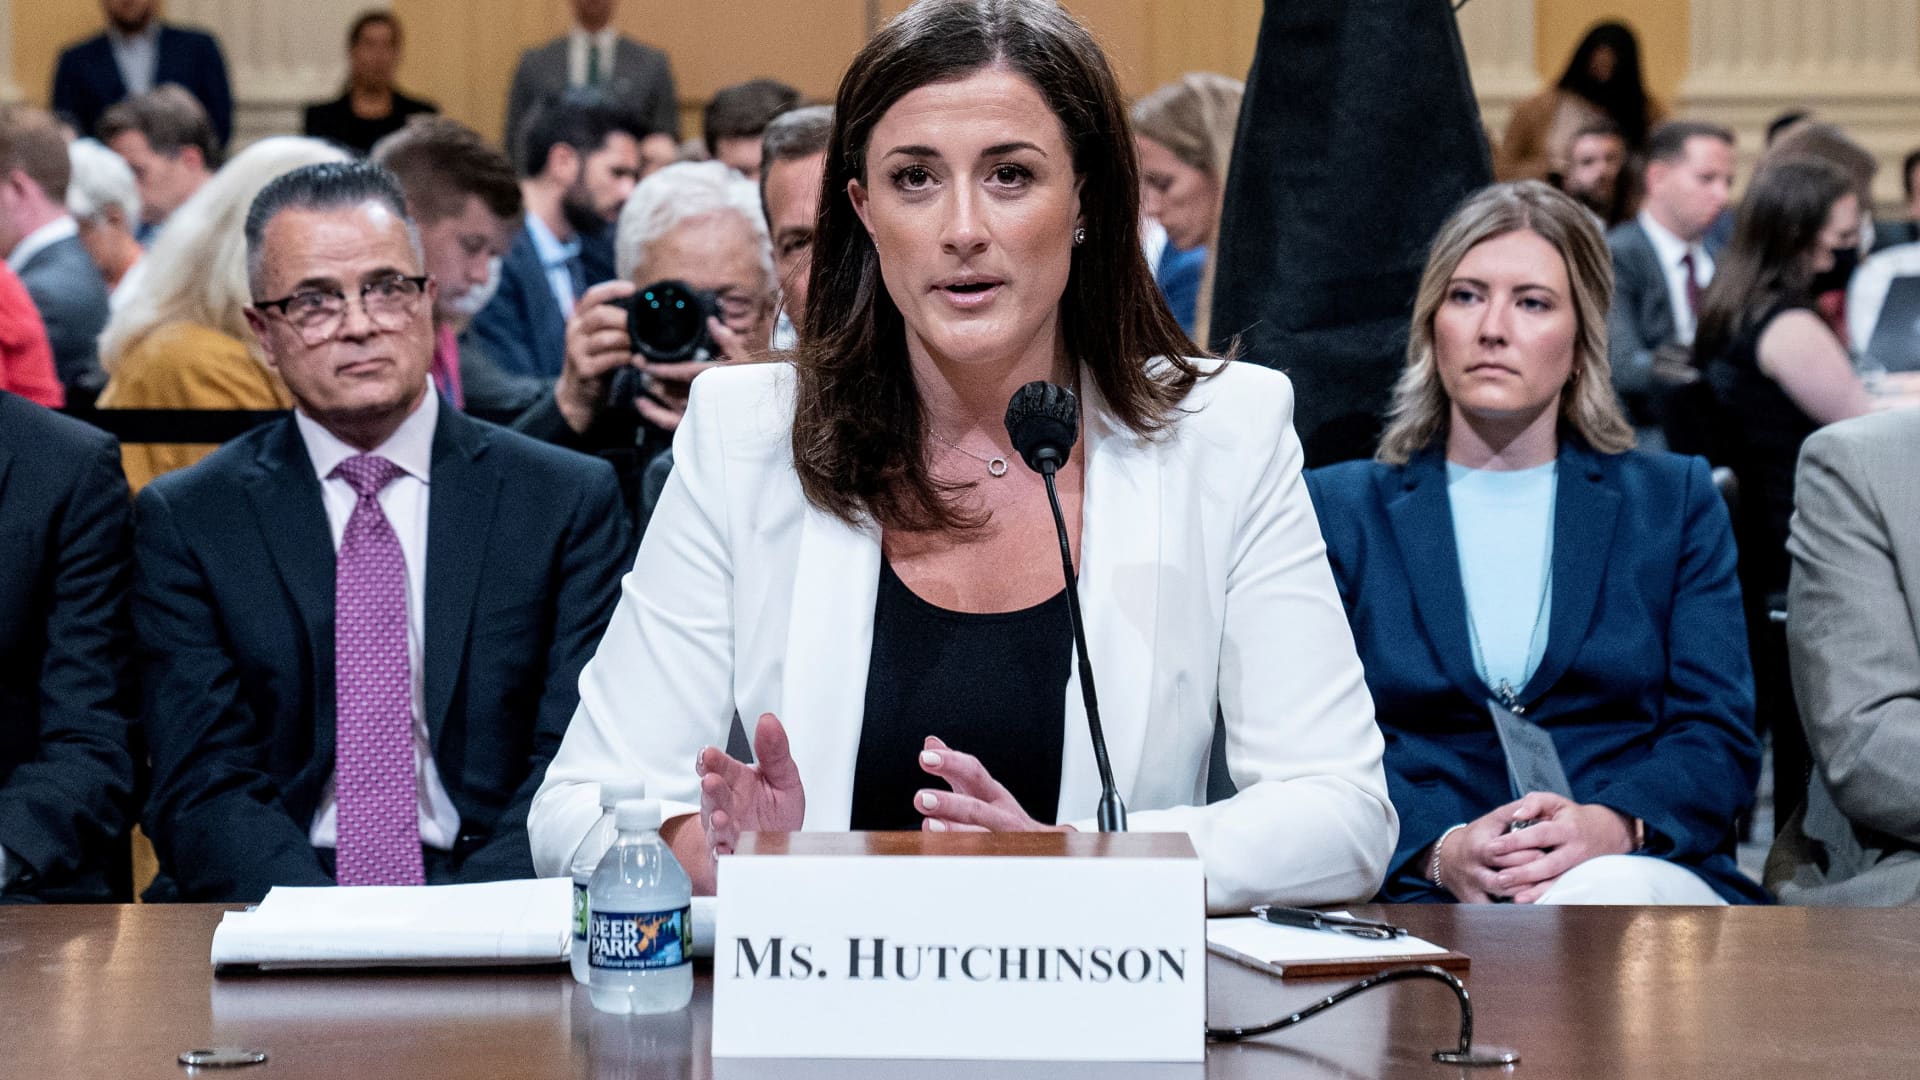 Cassidy Hutchinson, who was an aide to former White House Chief of Staff Mark Meadows during the administration of former U.S. President Donald Trump, testifies during a public hearing of the U.S. House Select Committee investigating the January 6 Attack on the U.S. Capitol, at the Capitol, in Washington, June 28, 2022.